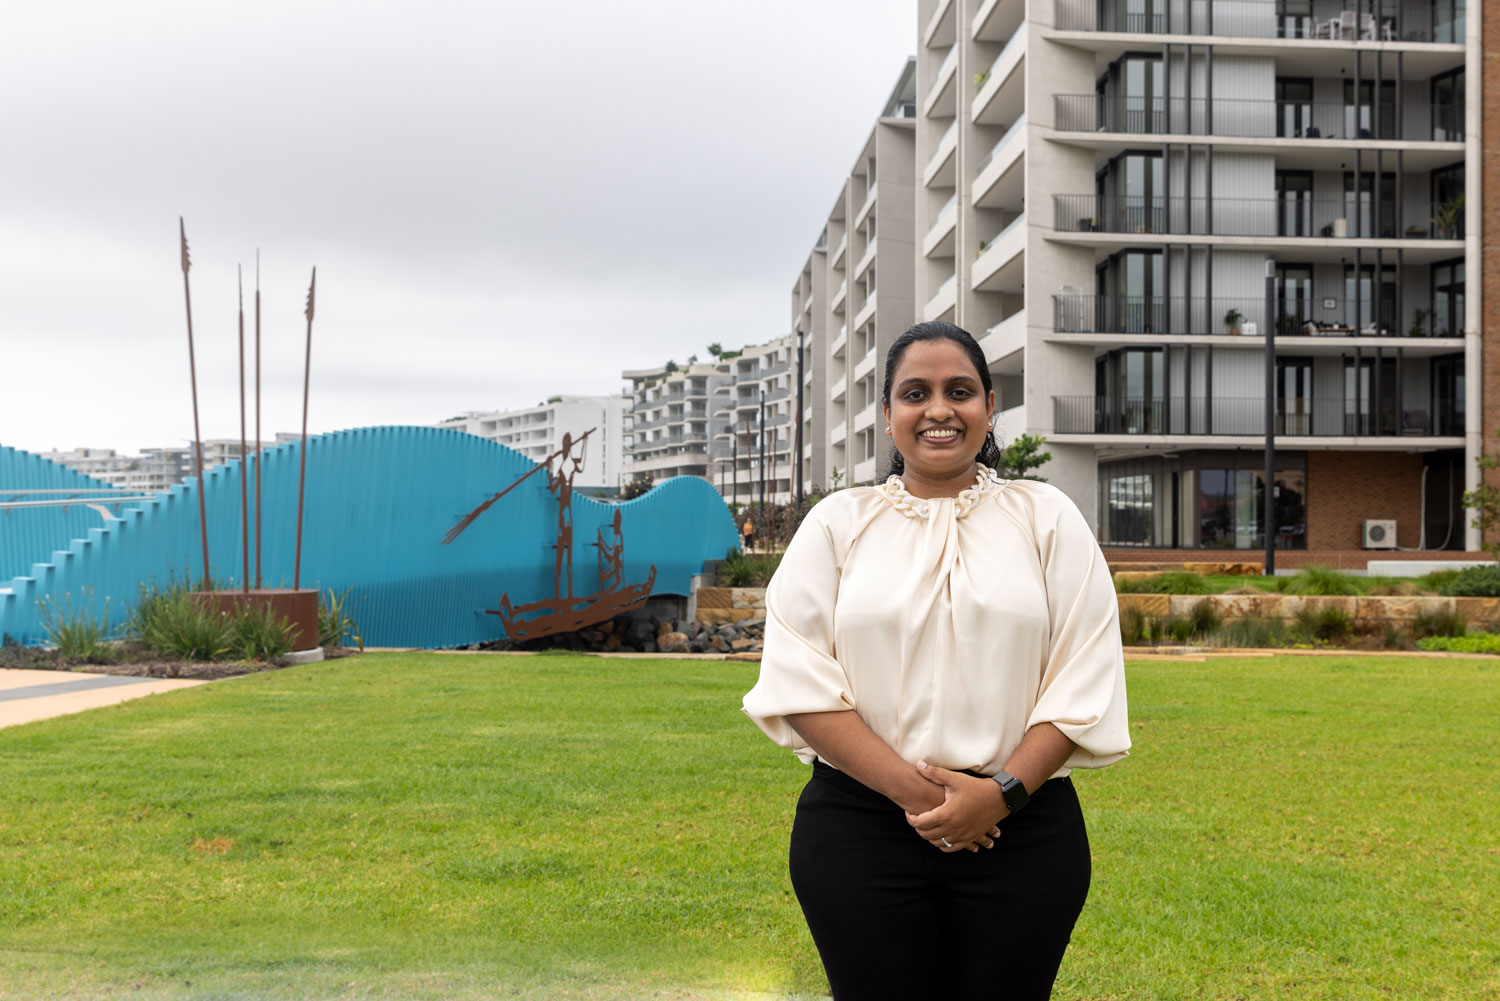 Dr Buddhini Ginigaddara standing in front of newly constructed buildings at Honeysuckle